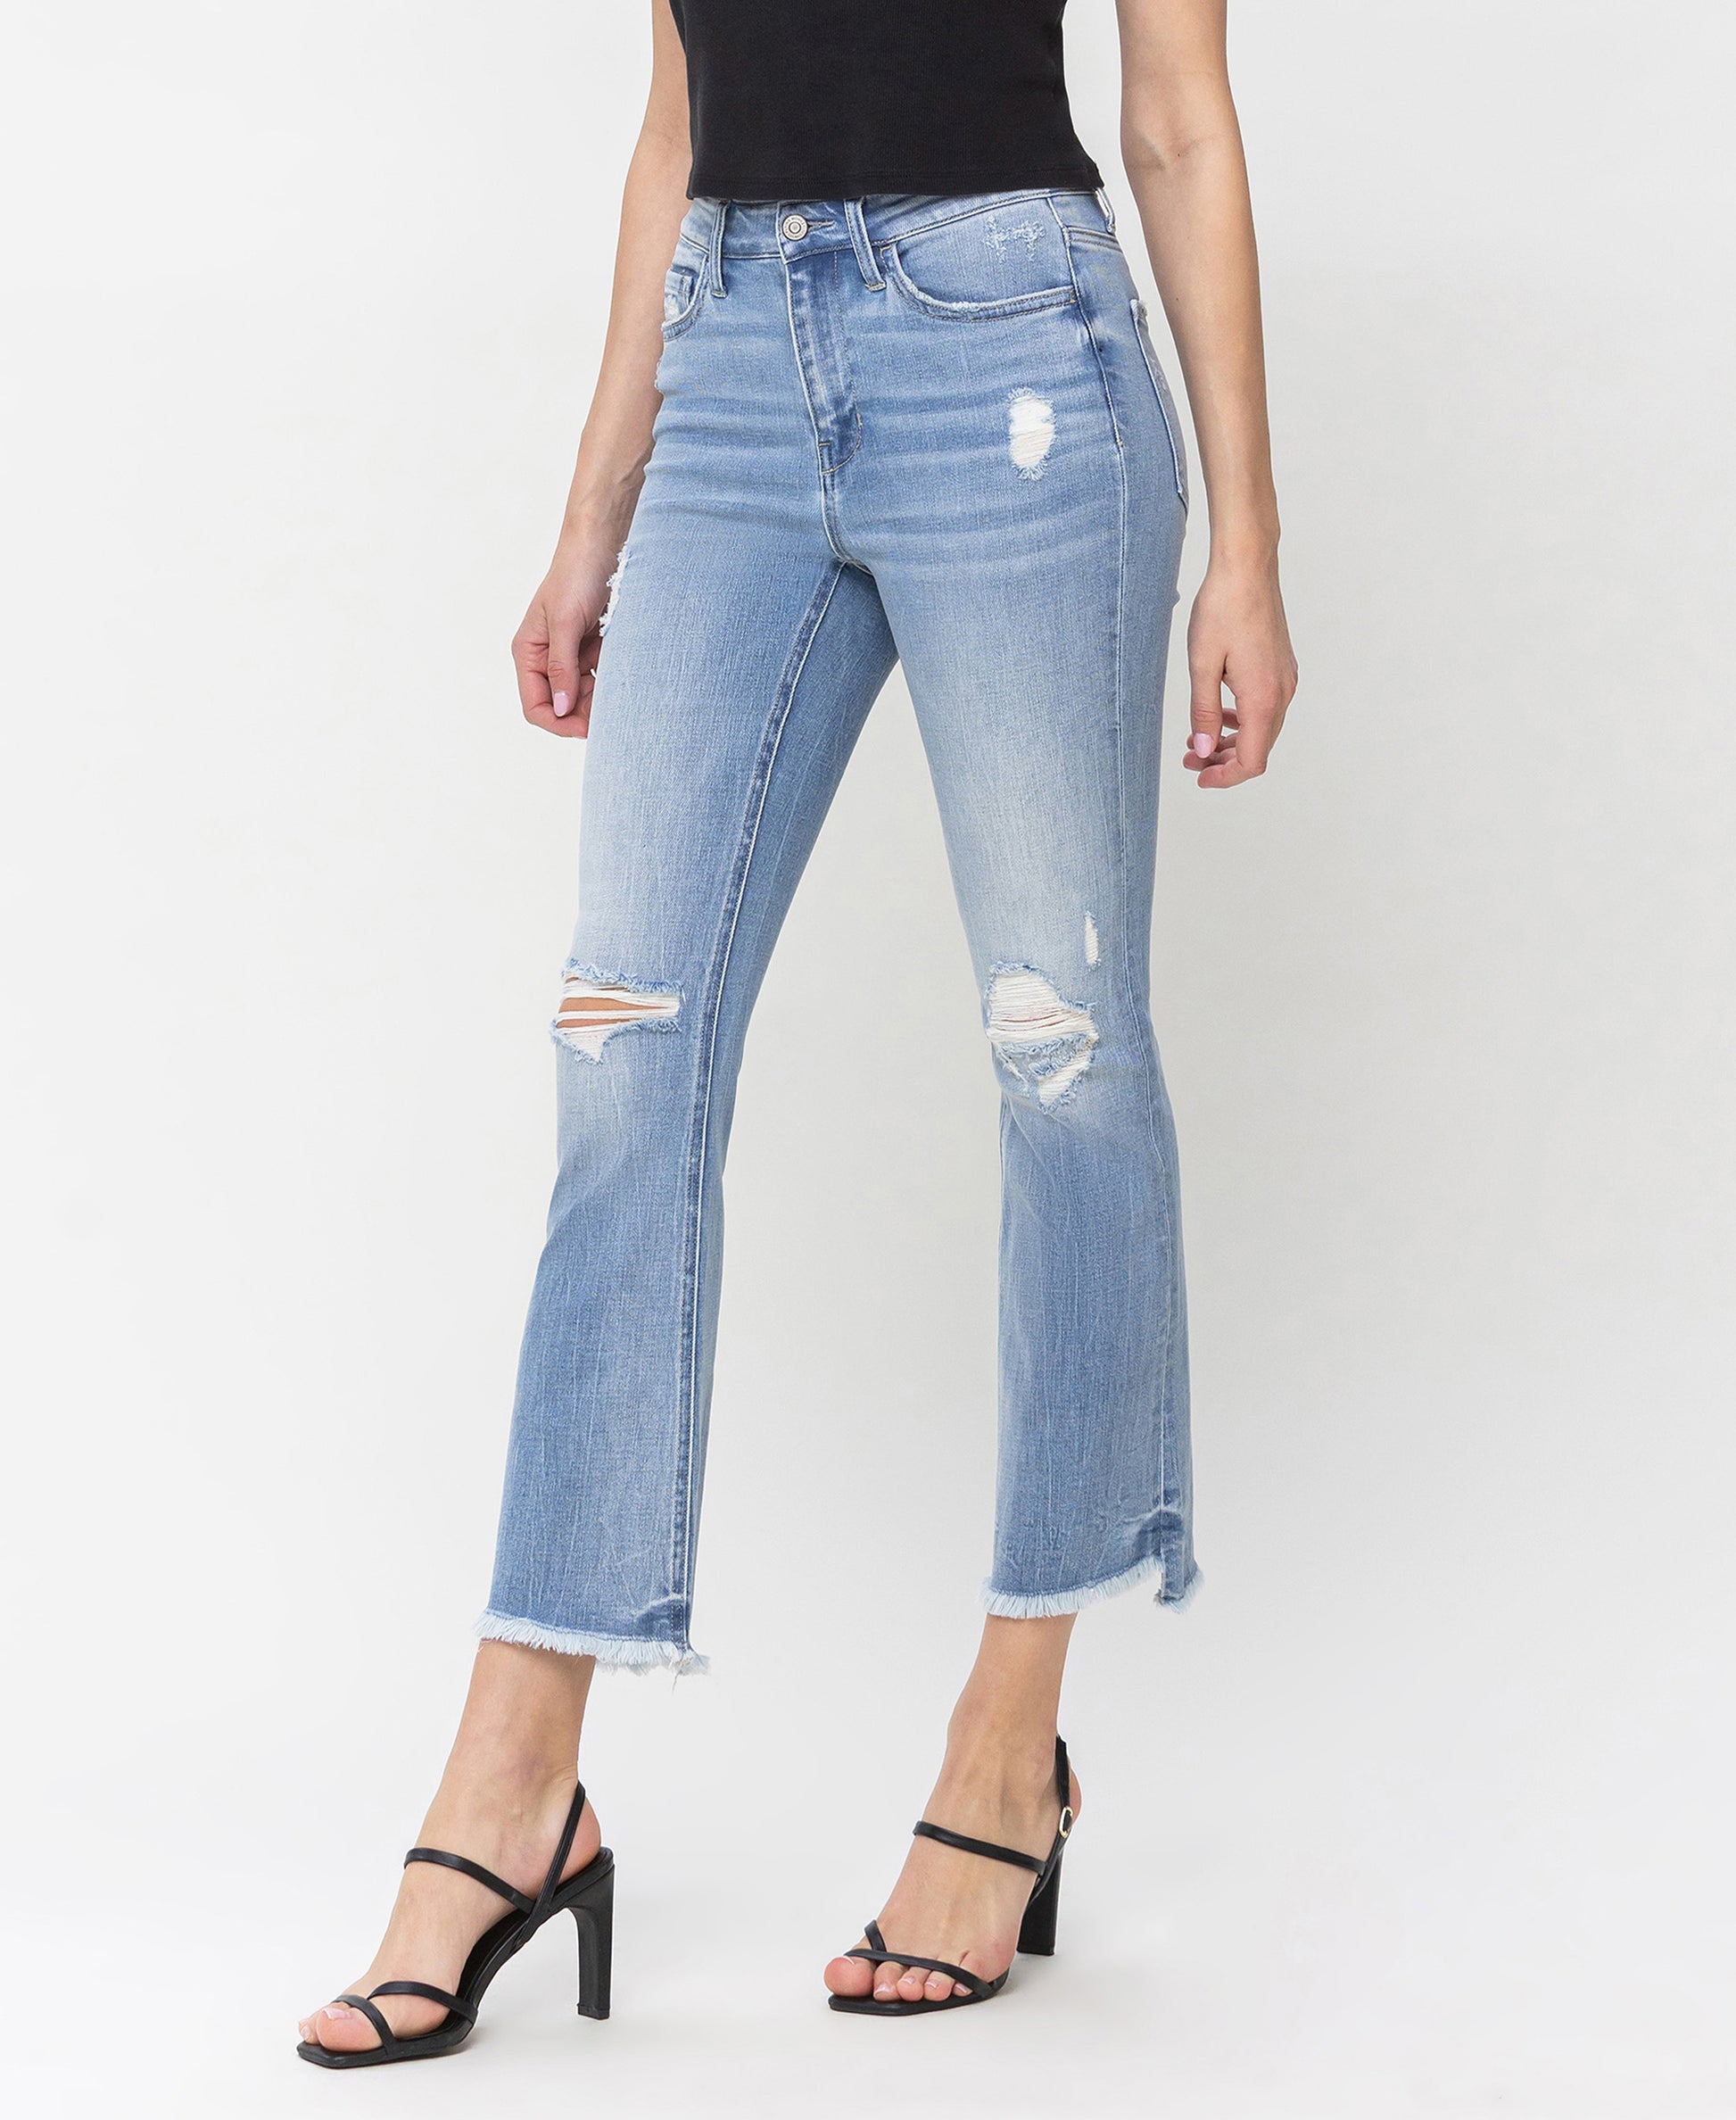 Left 45 degrees product image of Frolic - High Rise Kick Flare Jeans